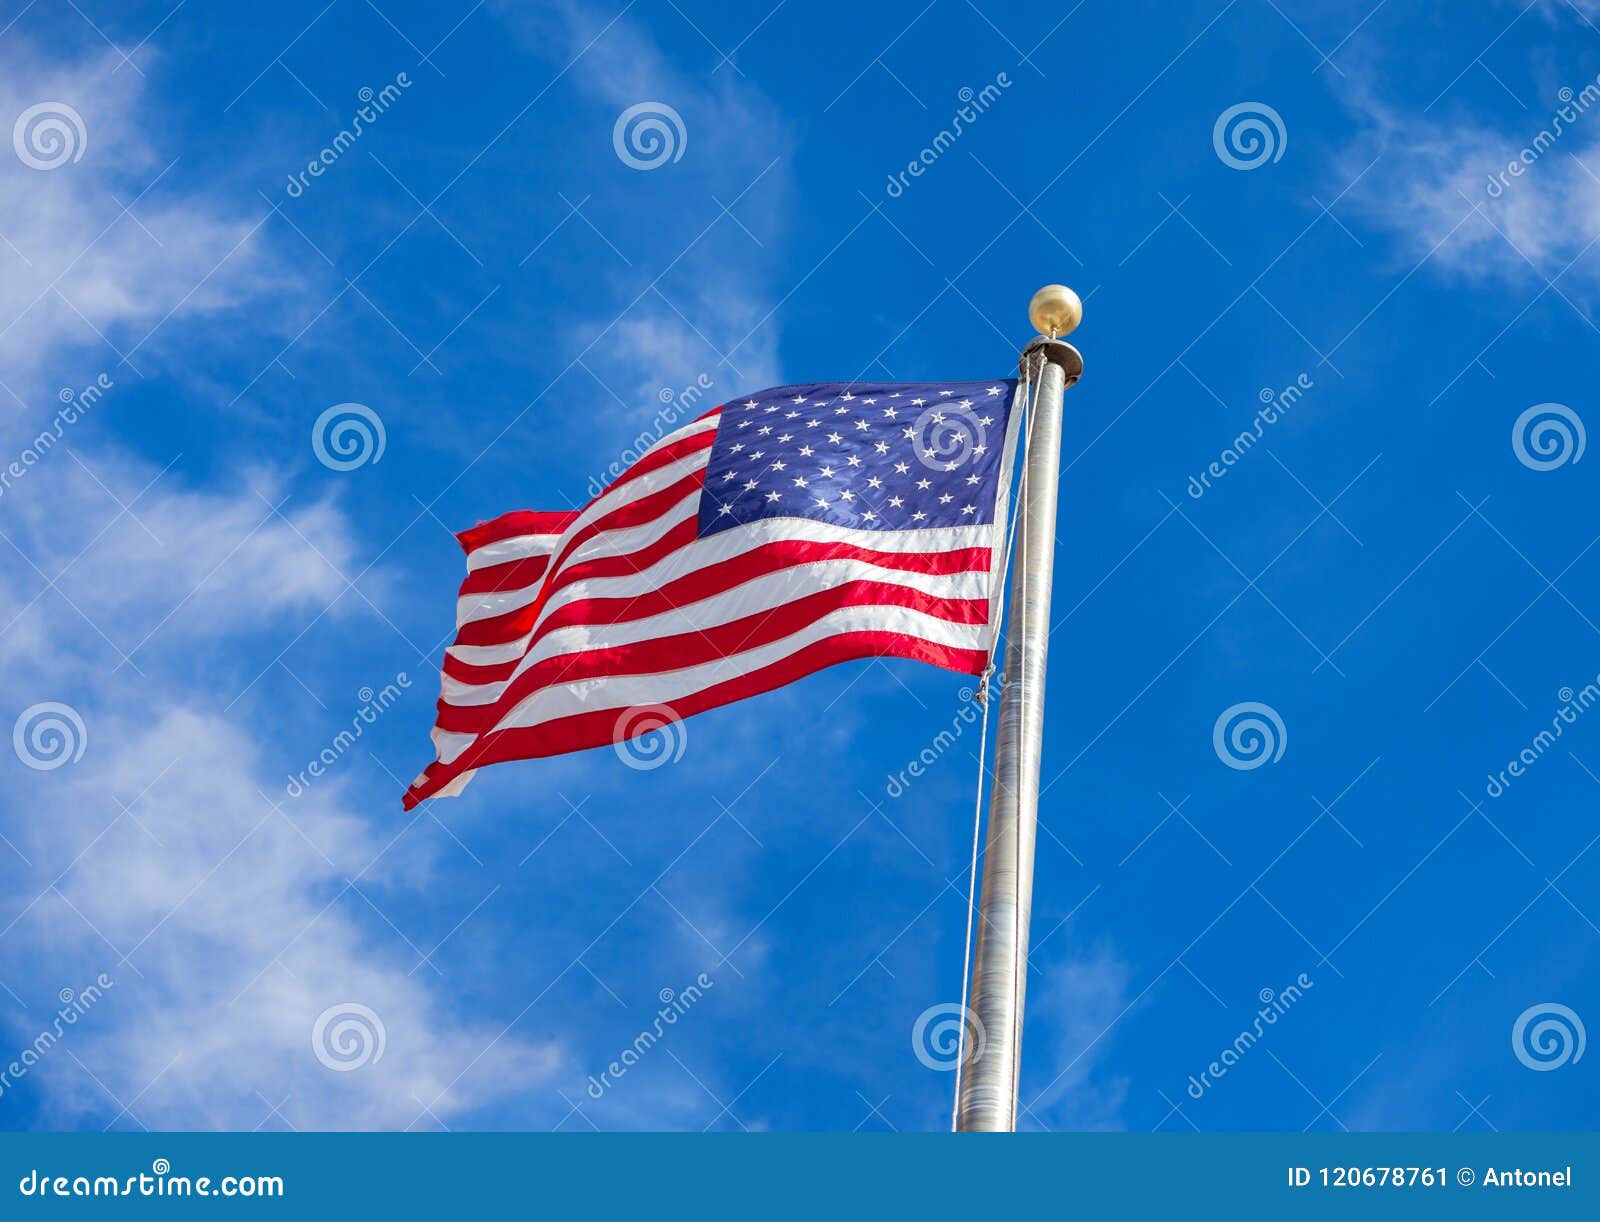 Waving Flag Of The United States Against The Blue Sky With White Clouds